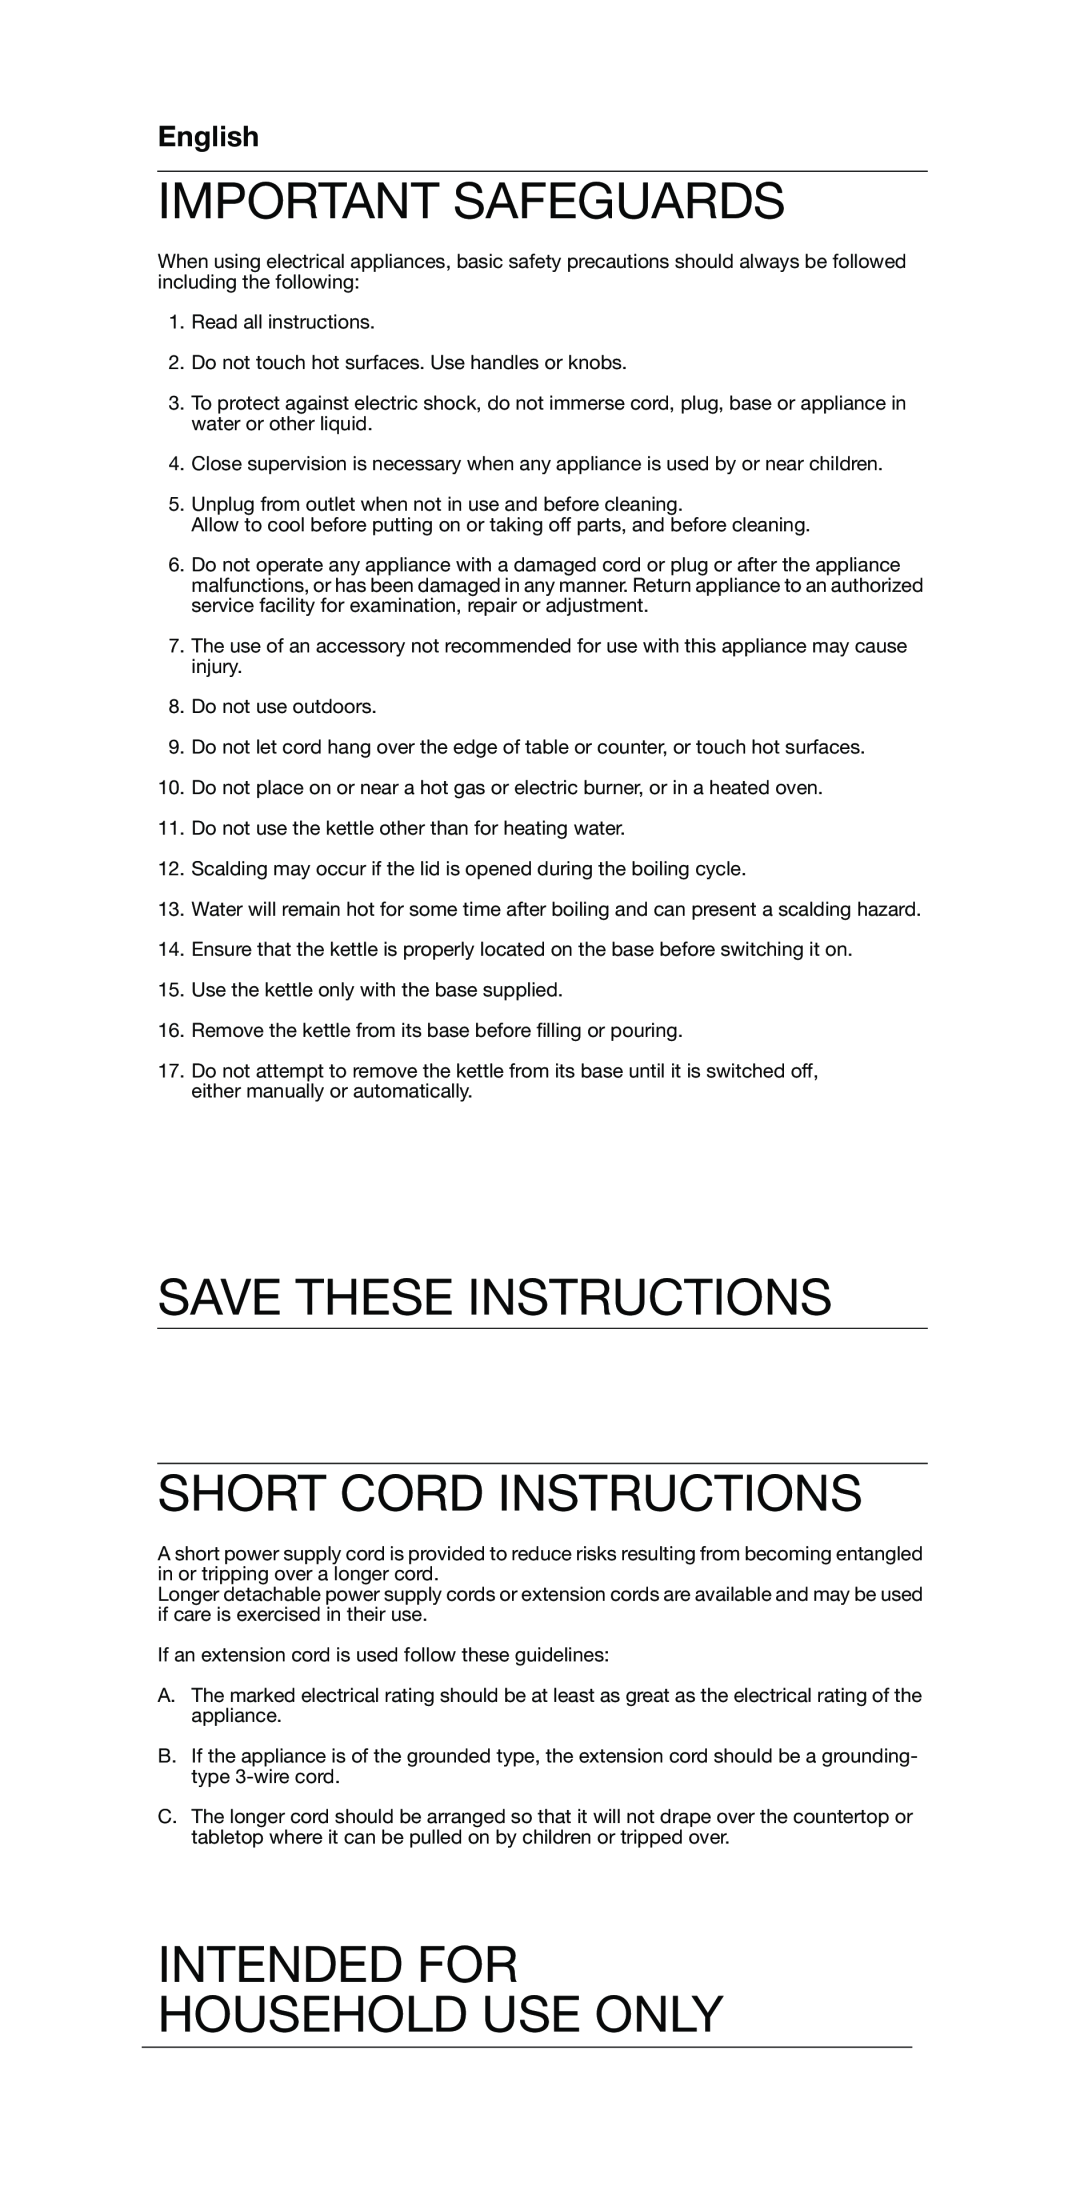 Braun 3219 Important Safeguards, Save These Instructions Short Cord Instructions, Intended For Household Use Only, English 